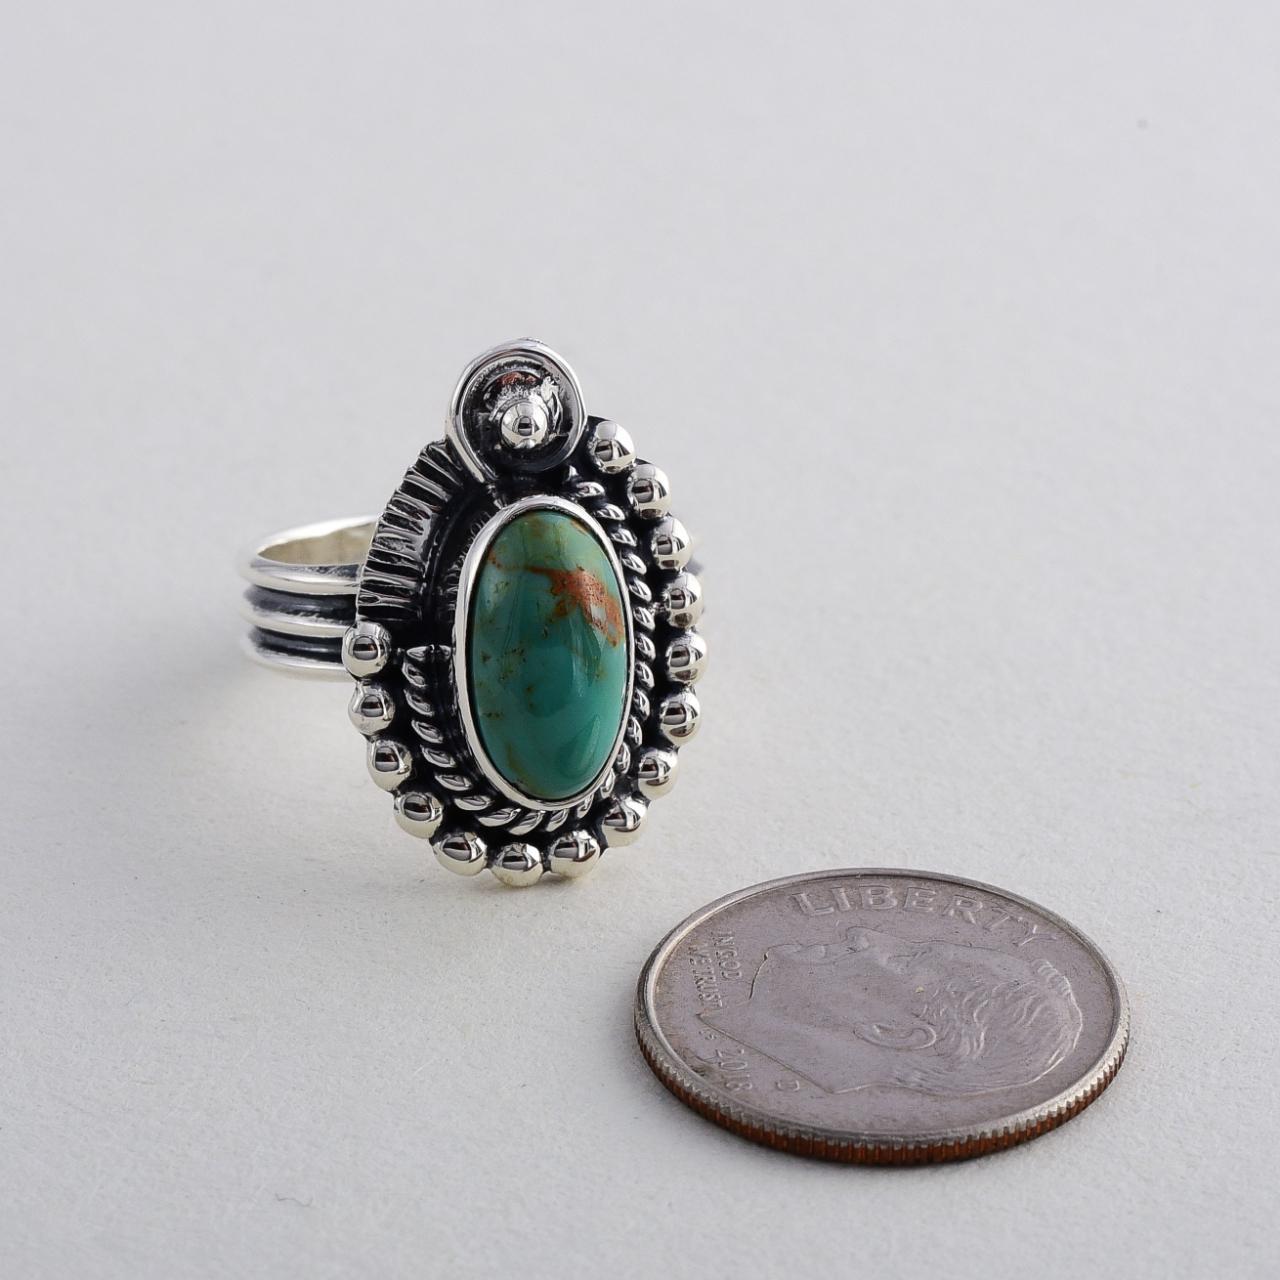 Product Image 2 - Sterling 925 Turquoise Ring

Sterling Silver

Size